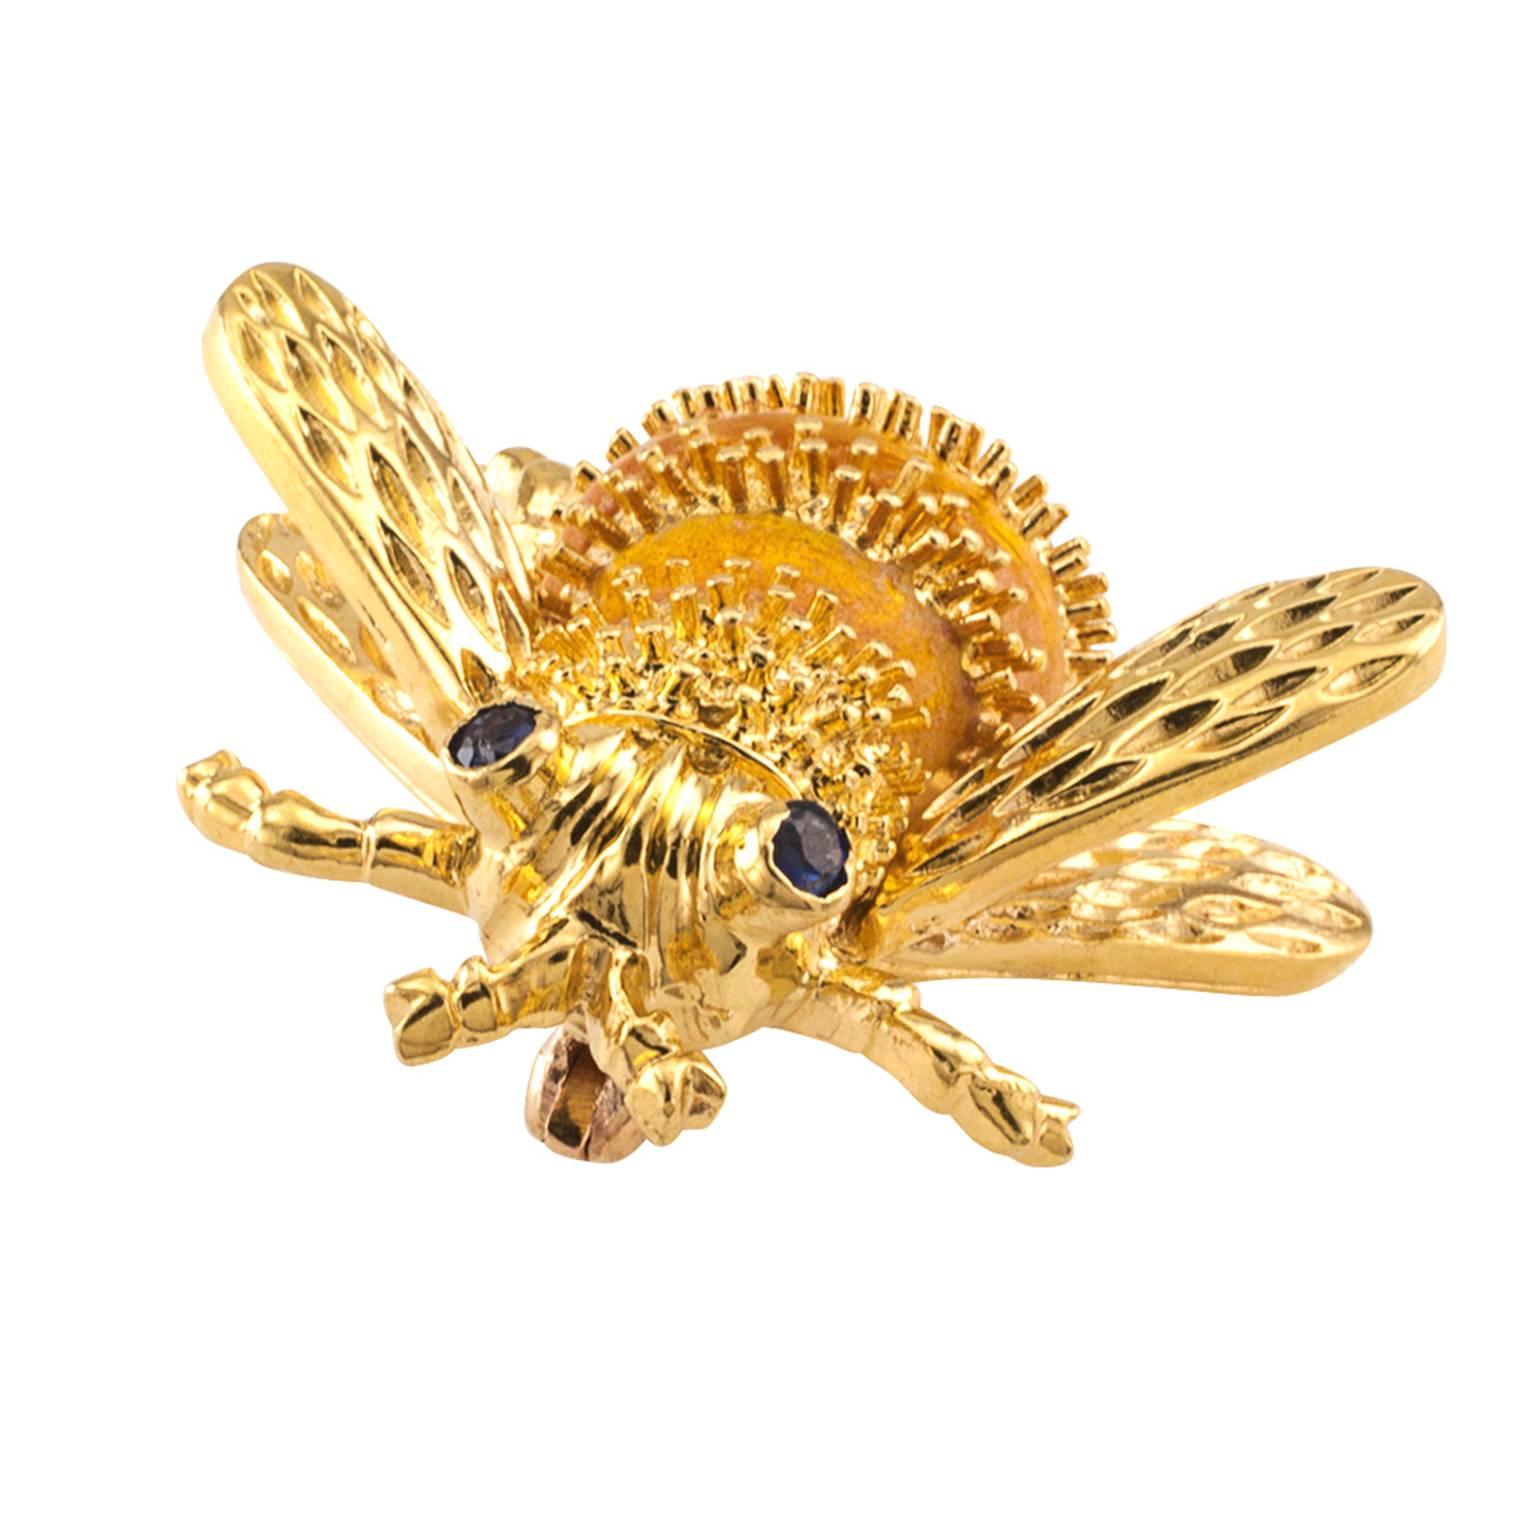 Sapphire Enamel and Gold Bee Brooch

Busy, pretty and dainty bumble bee with blue sapphire eyes, the abdomen decorated by alternating bands of textured gold and translucent amber-honey colored enamel.  Buz, Buz, Buz!  Crafted in 18 karat yellow